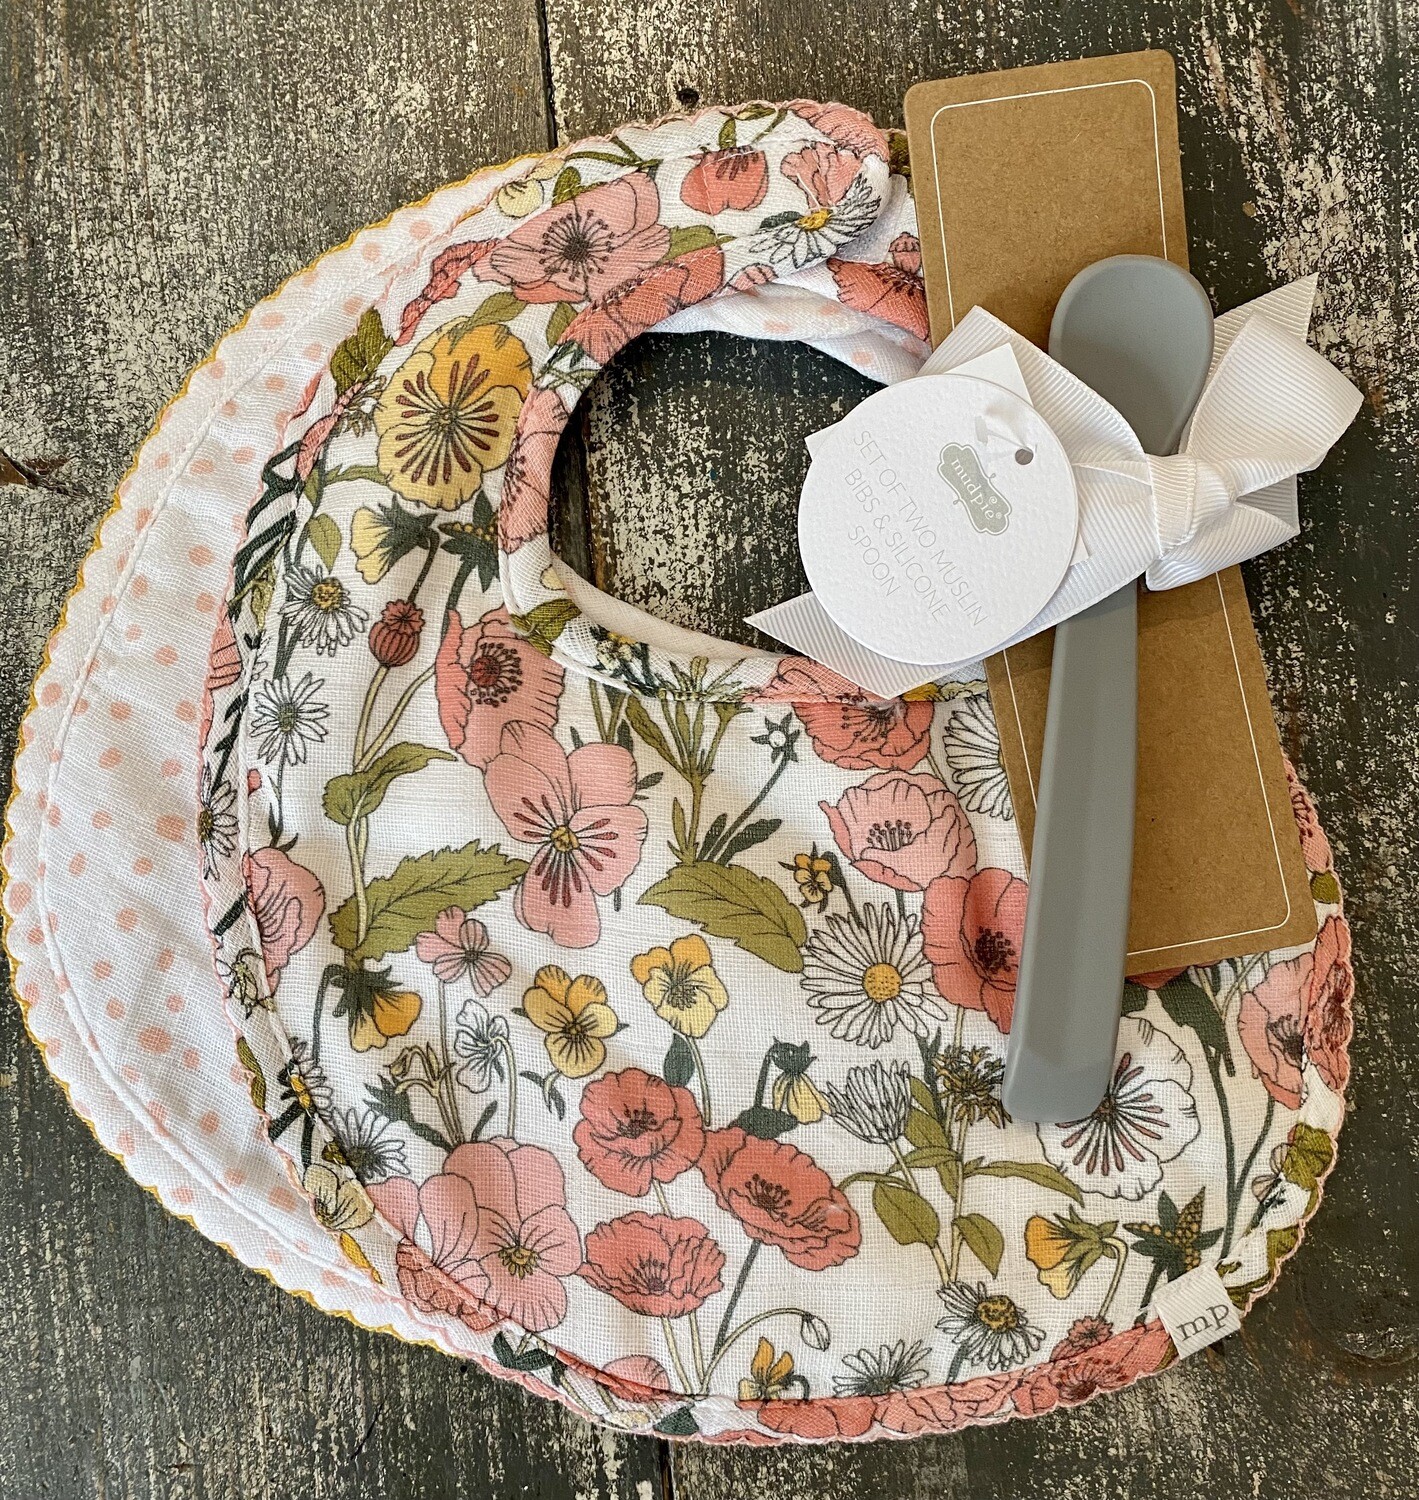 16.99 floral bib and spoon set